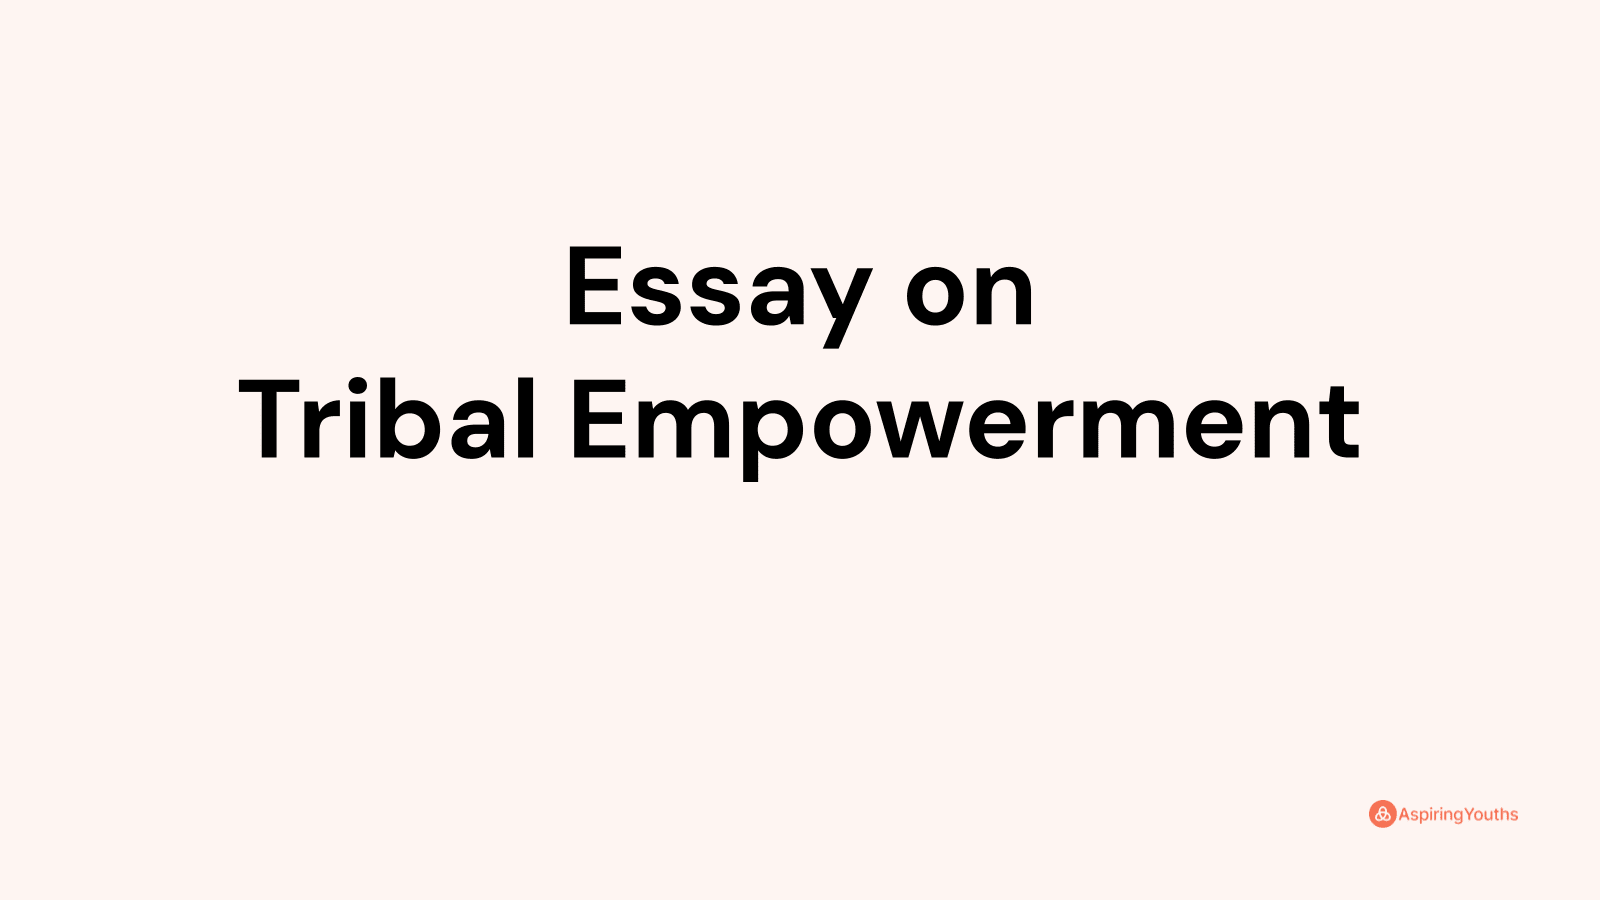 tribal empowerment essay in 200 words